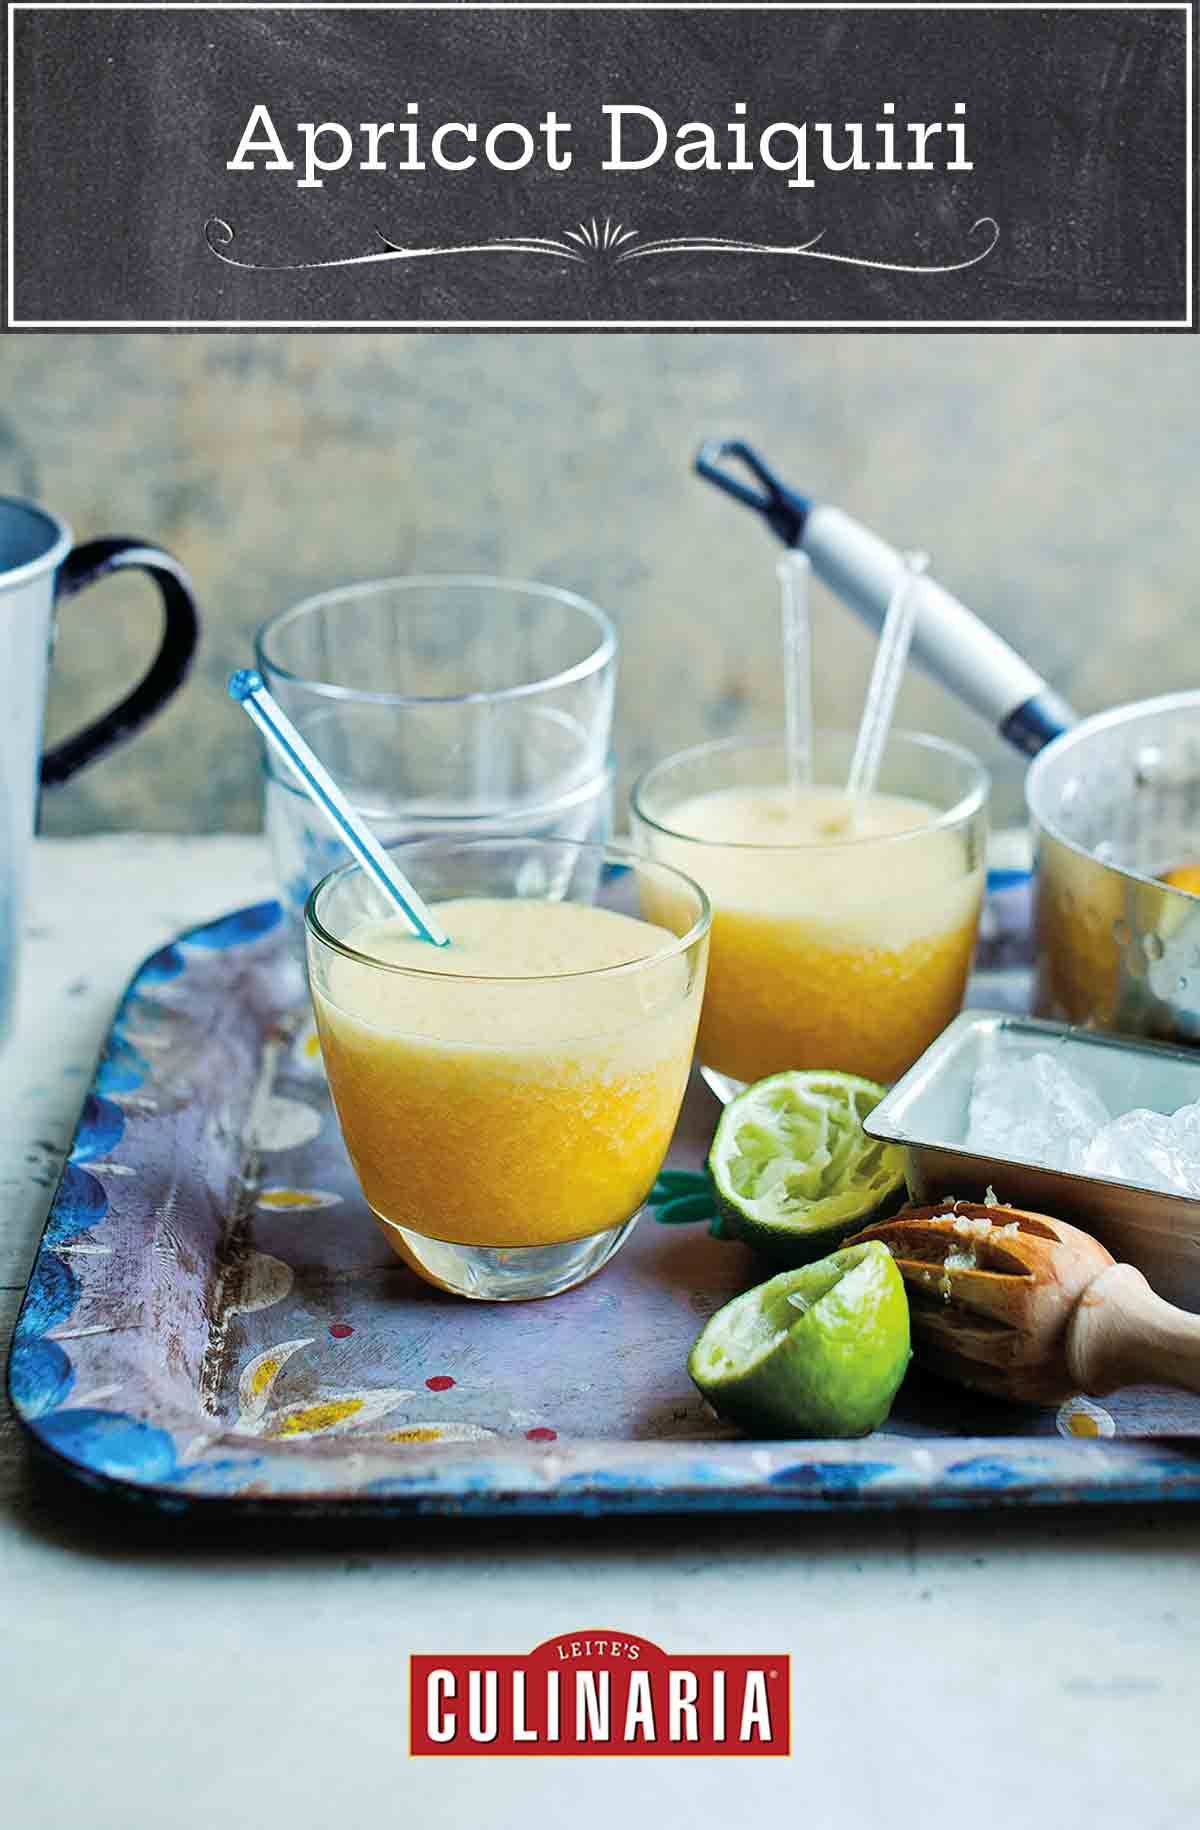 A metal serving tray with two apricot daiquiris with stir sticks, a juiced lemon, and a pot with poached apricots.